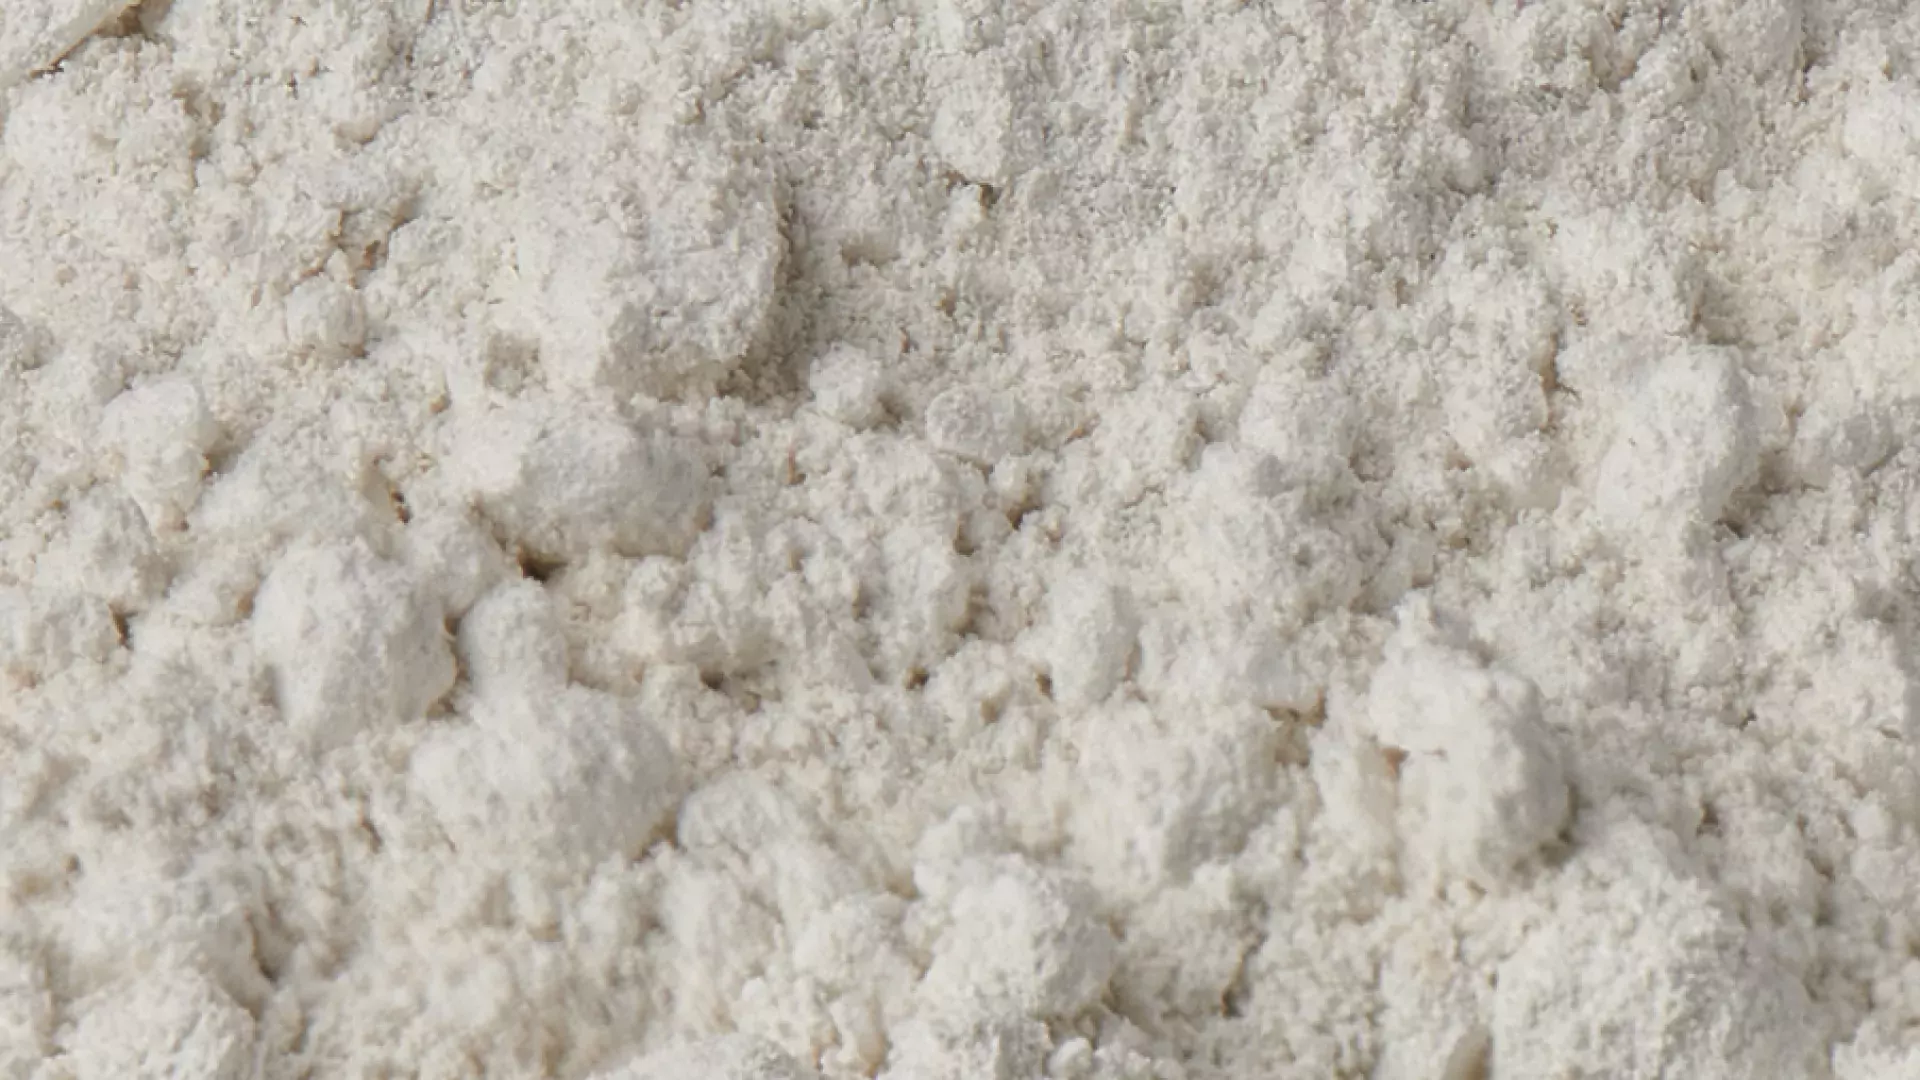 close-up on quicklime powder from Bukowa